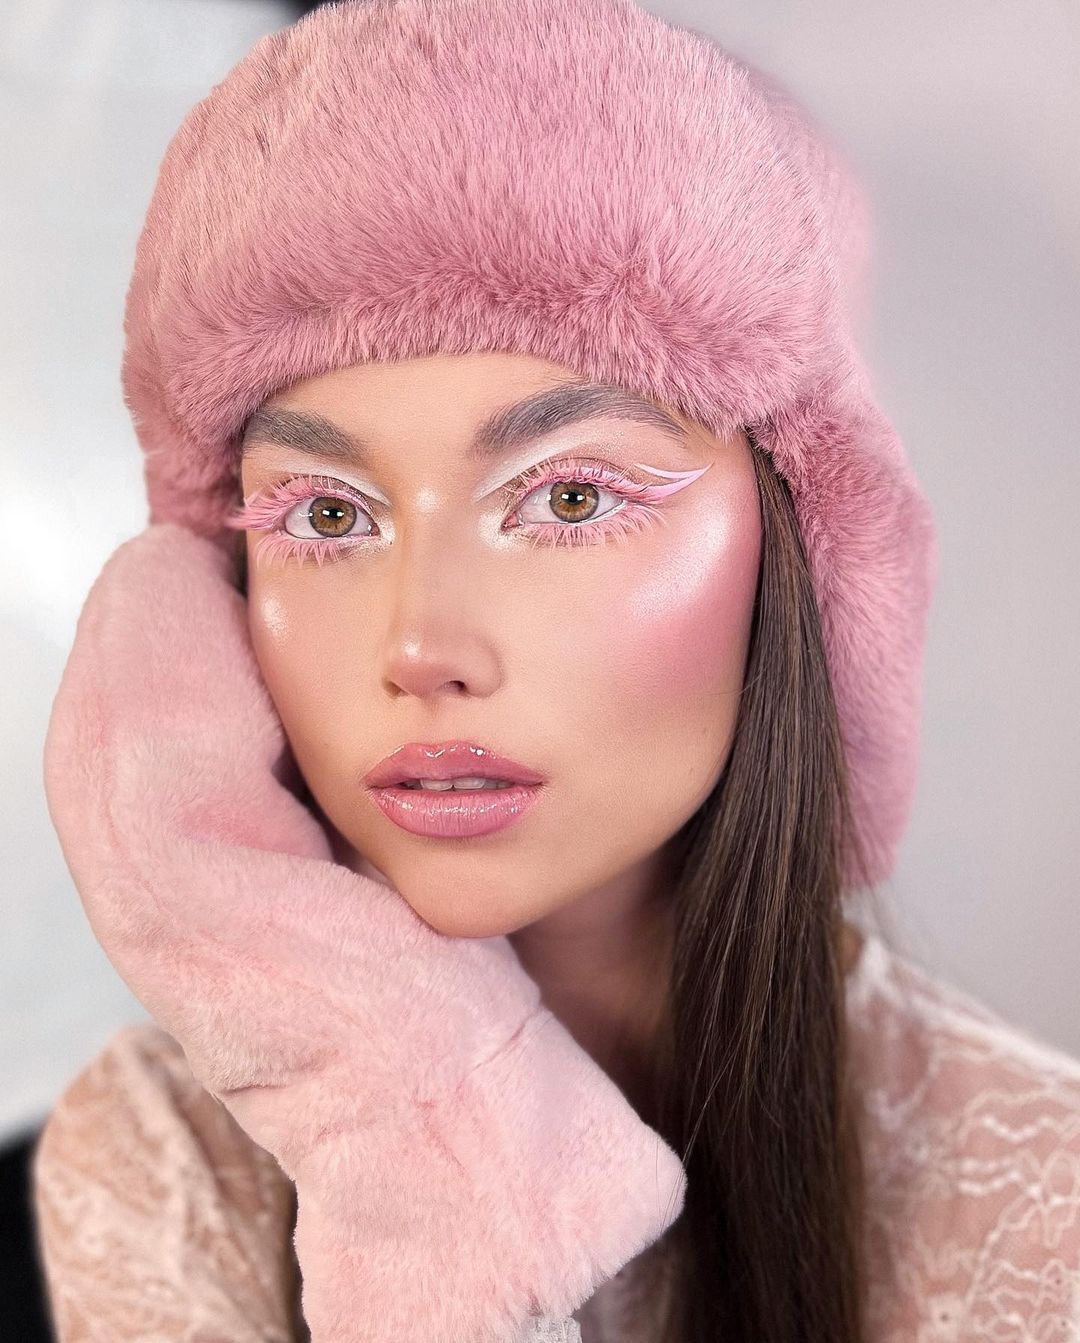 With glitter: 5 interesting makeup ideas for celebrating New Year 2024